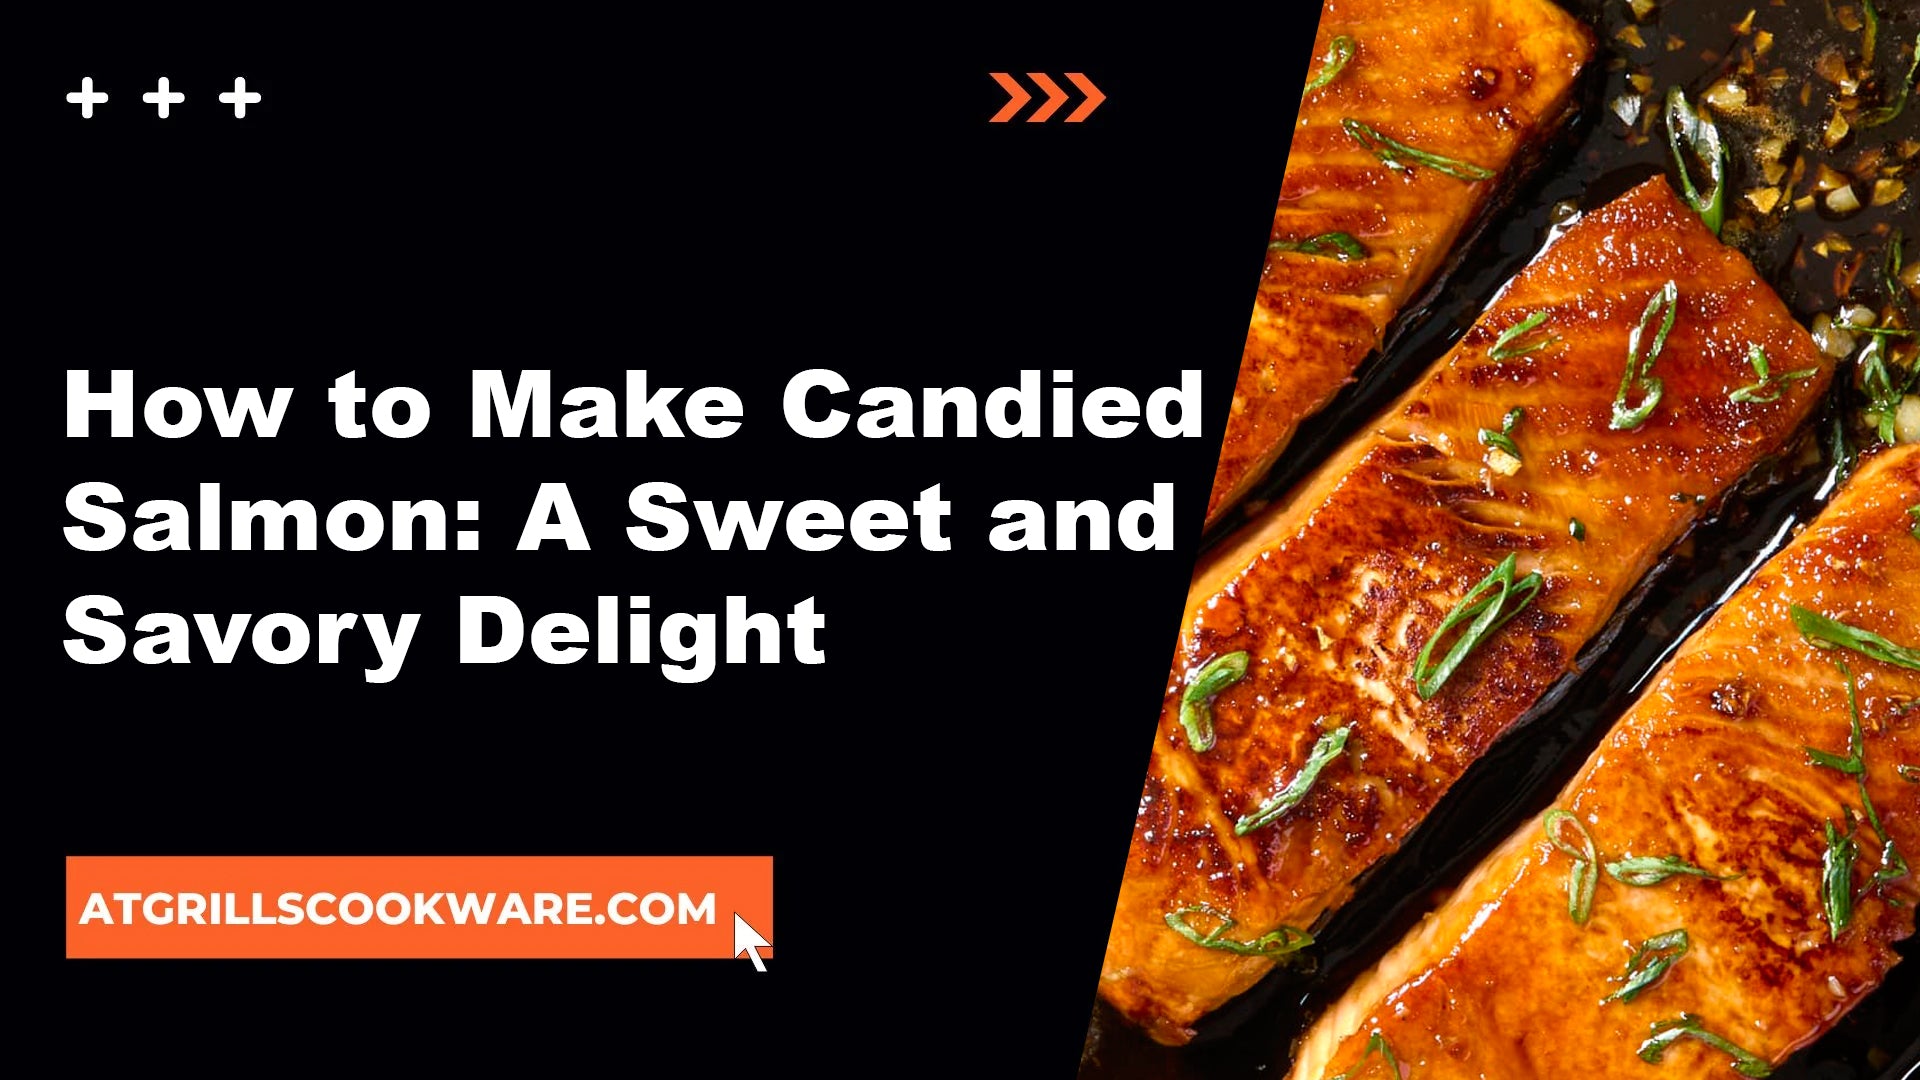 How to Make Candied Salmon: A Sweet and Savory Delight